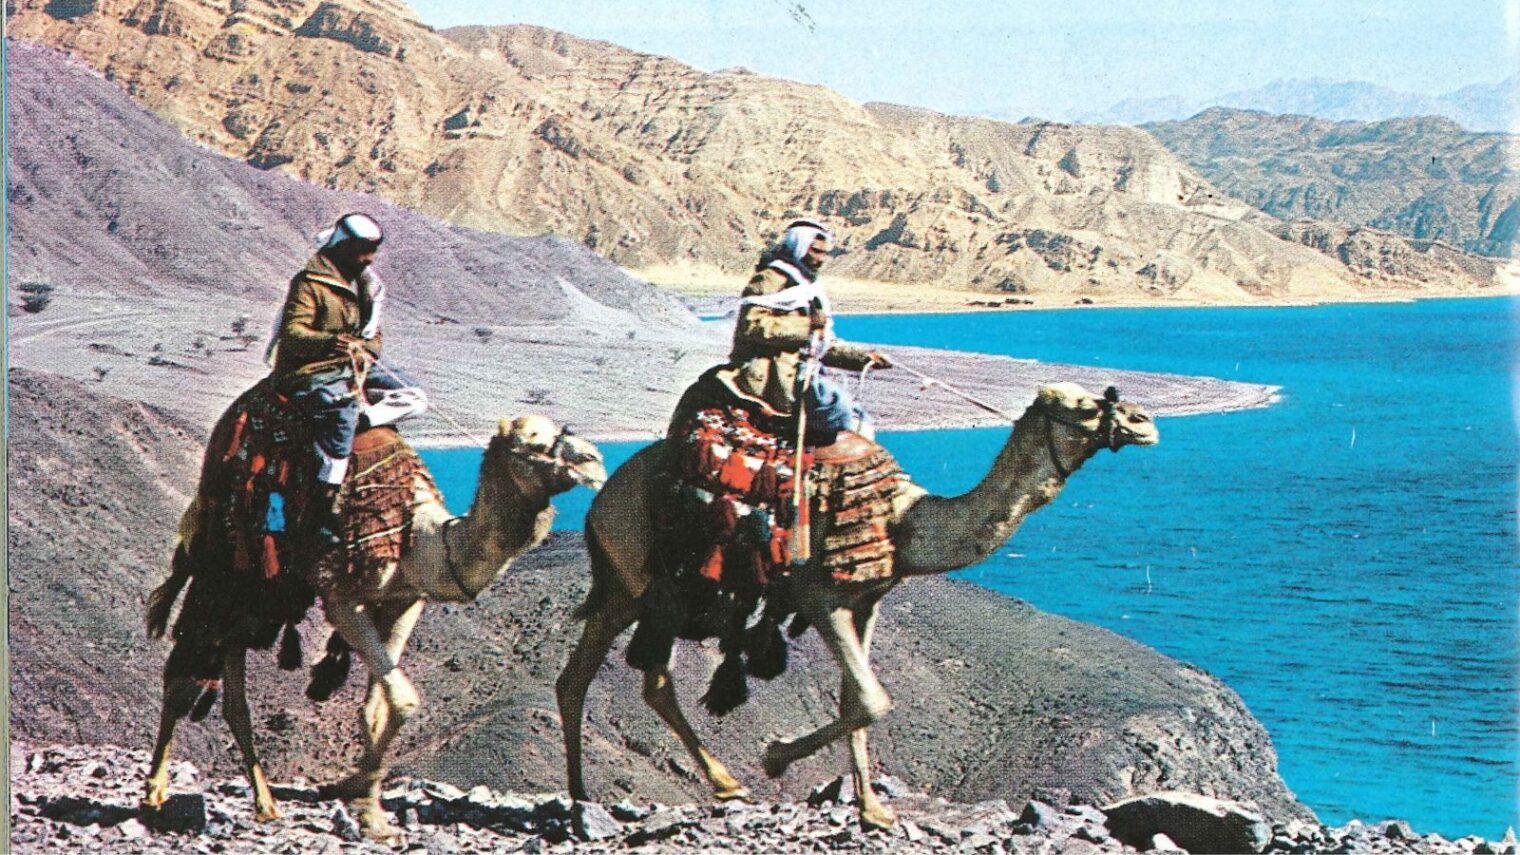 Bedouin riders at the Gulf of Eilat, as captured by Clinton Bailey. Photo courtesy of Clinton Bailey